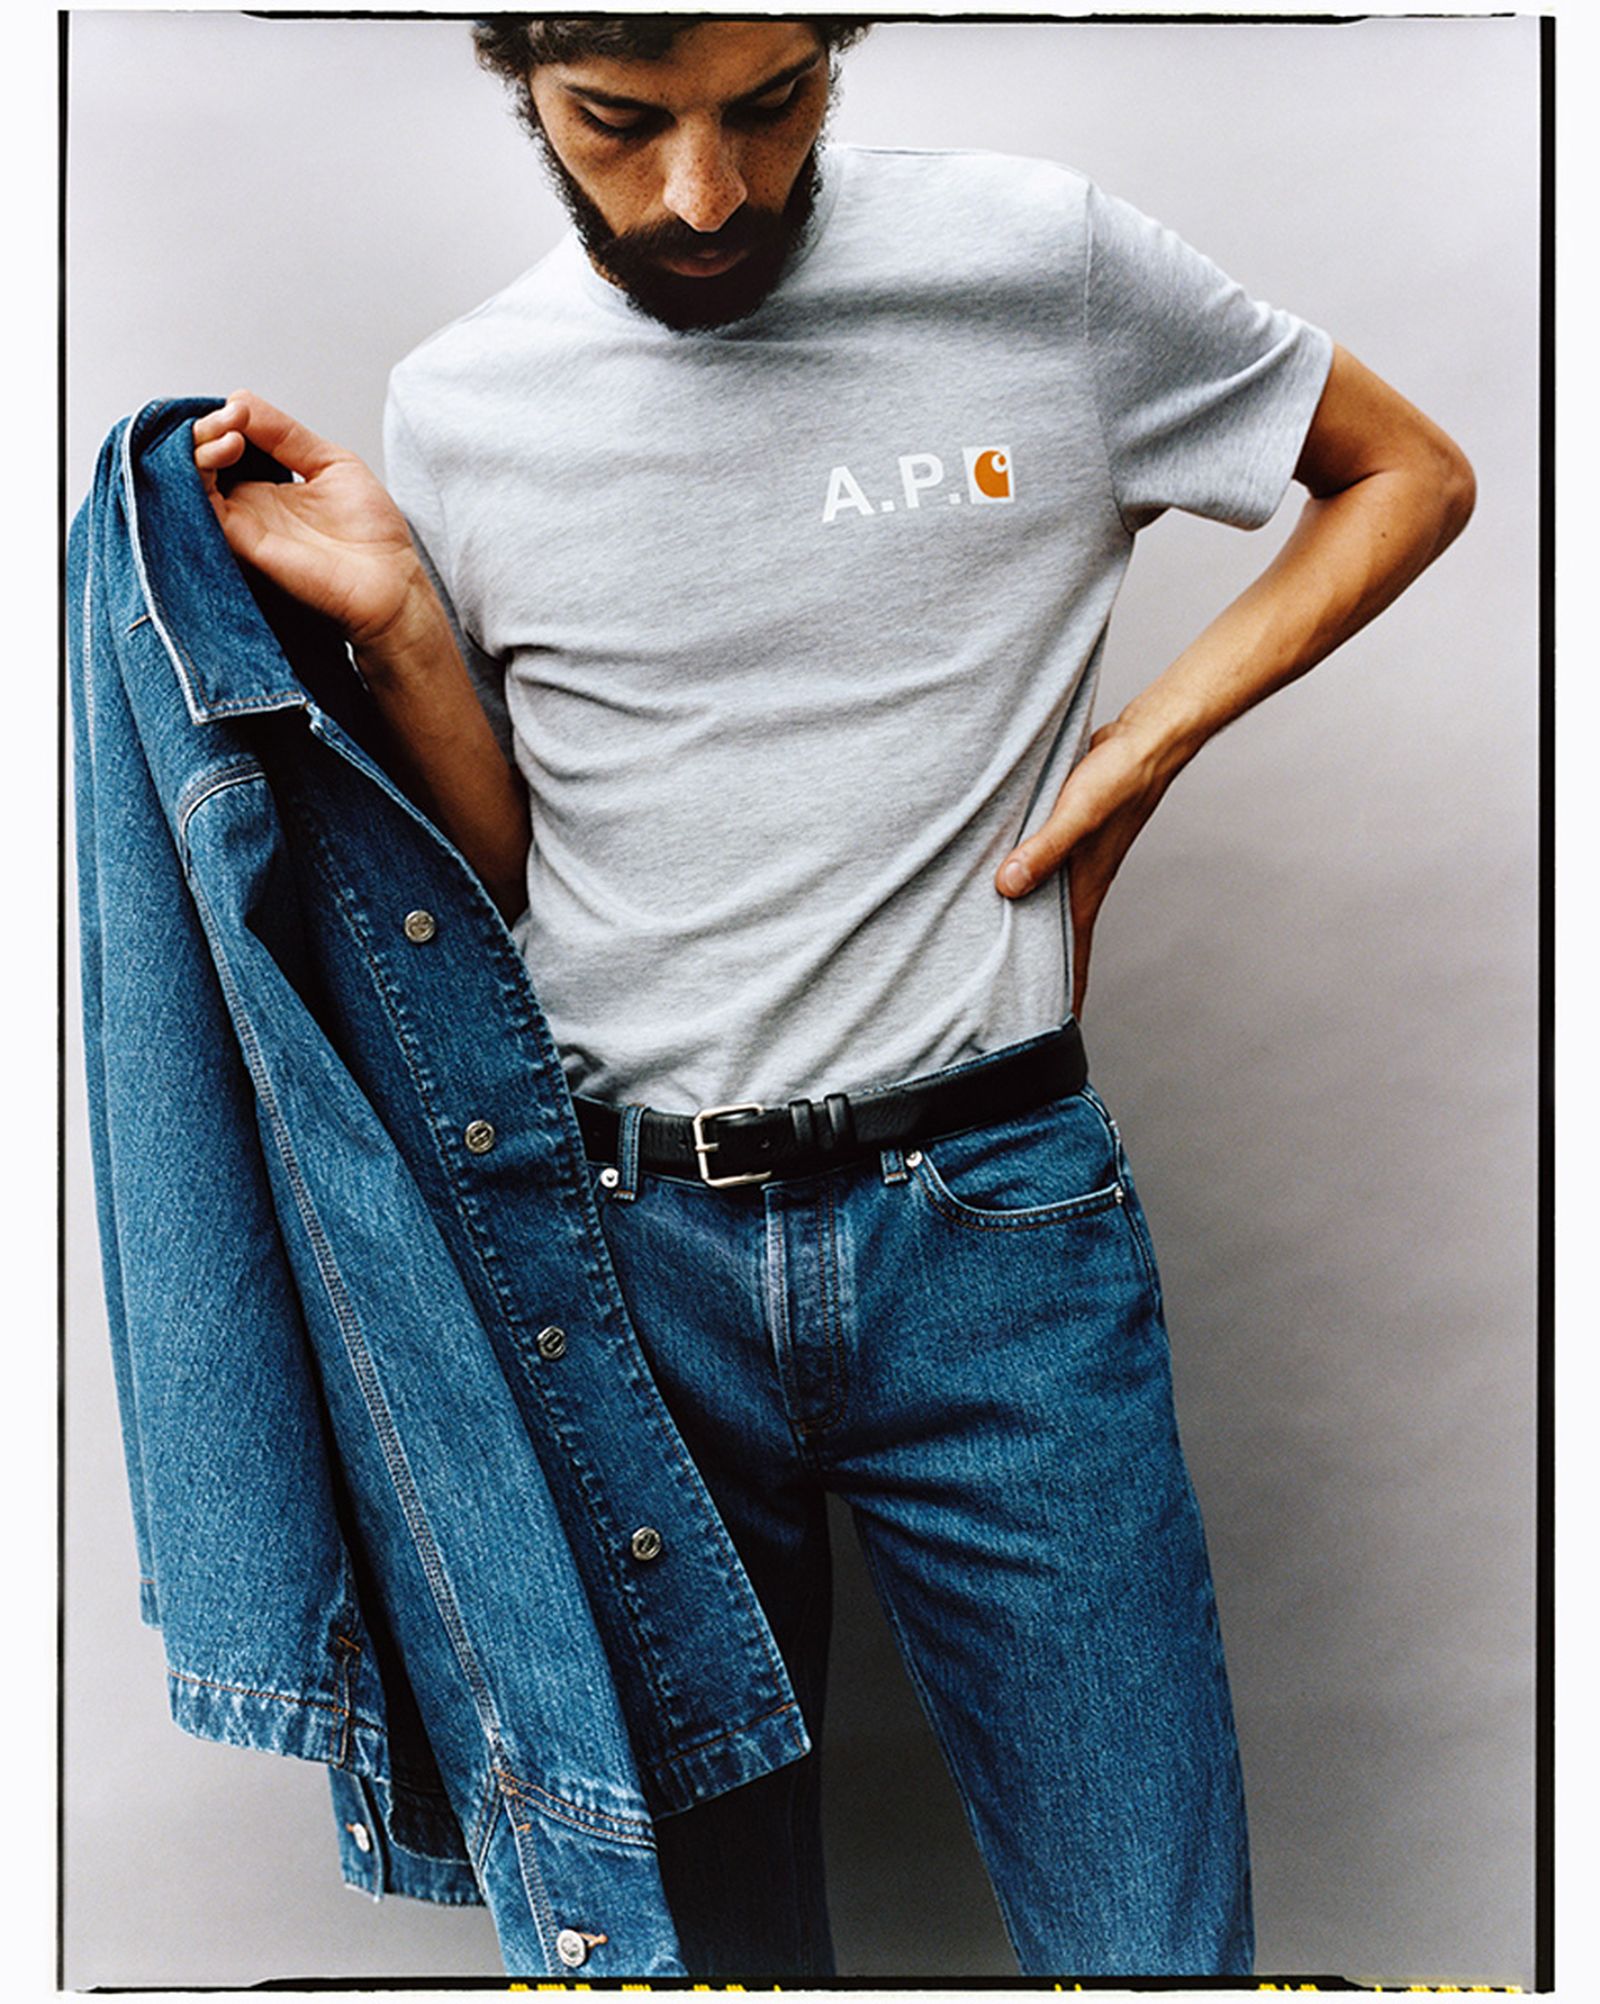 A.P.C. x Carhartt WIP SS20: First Full Look & Where to Buy